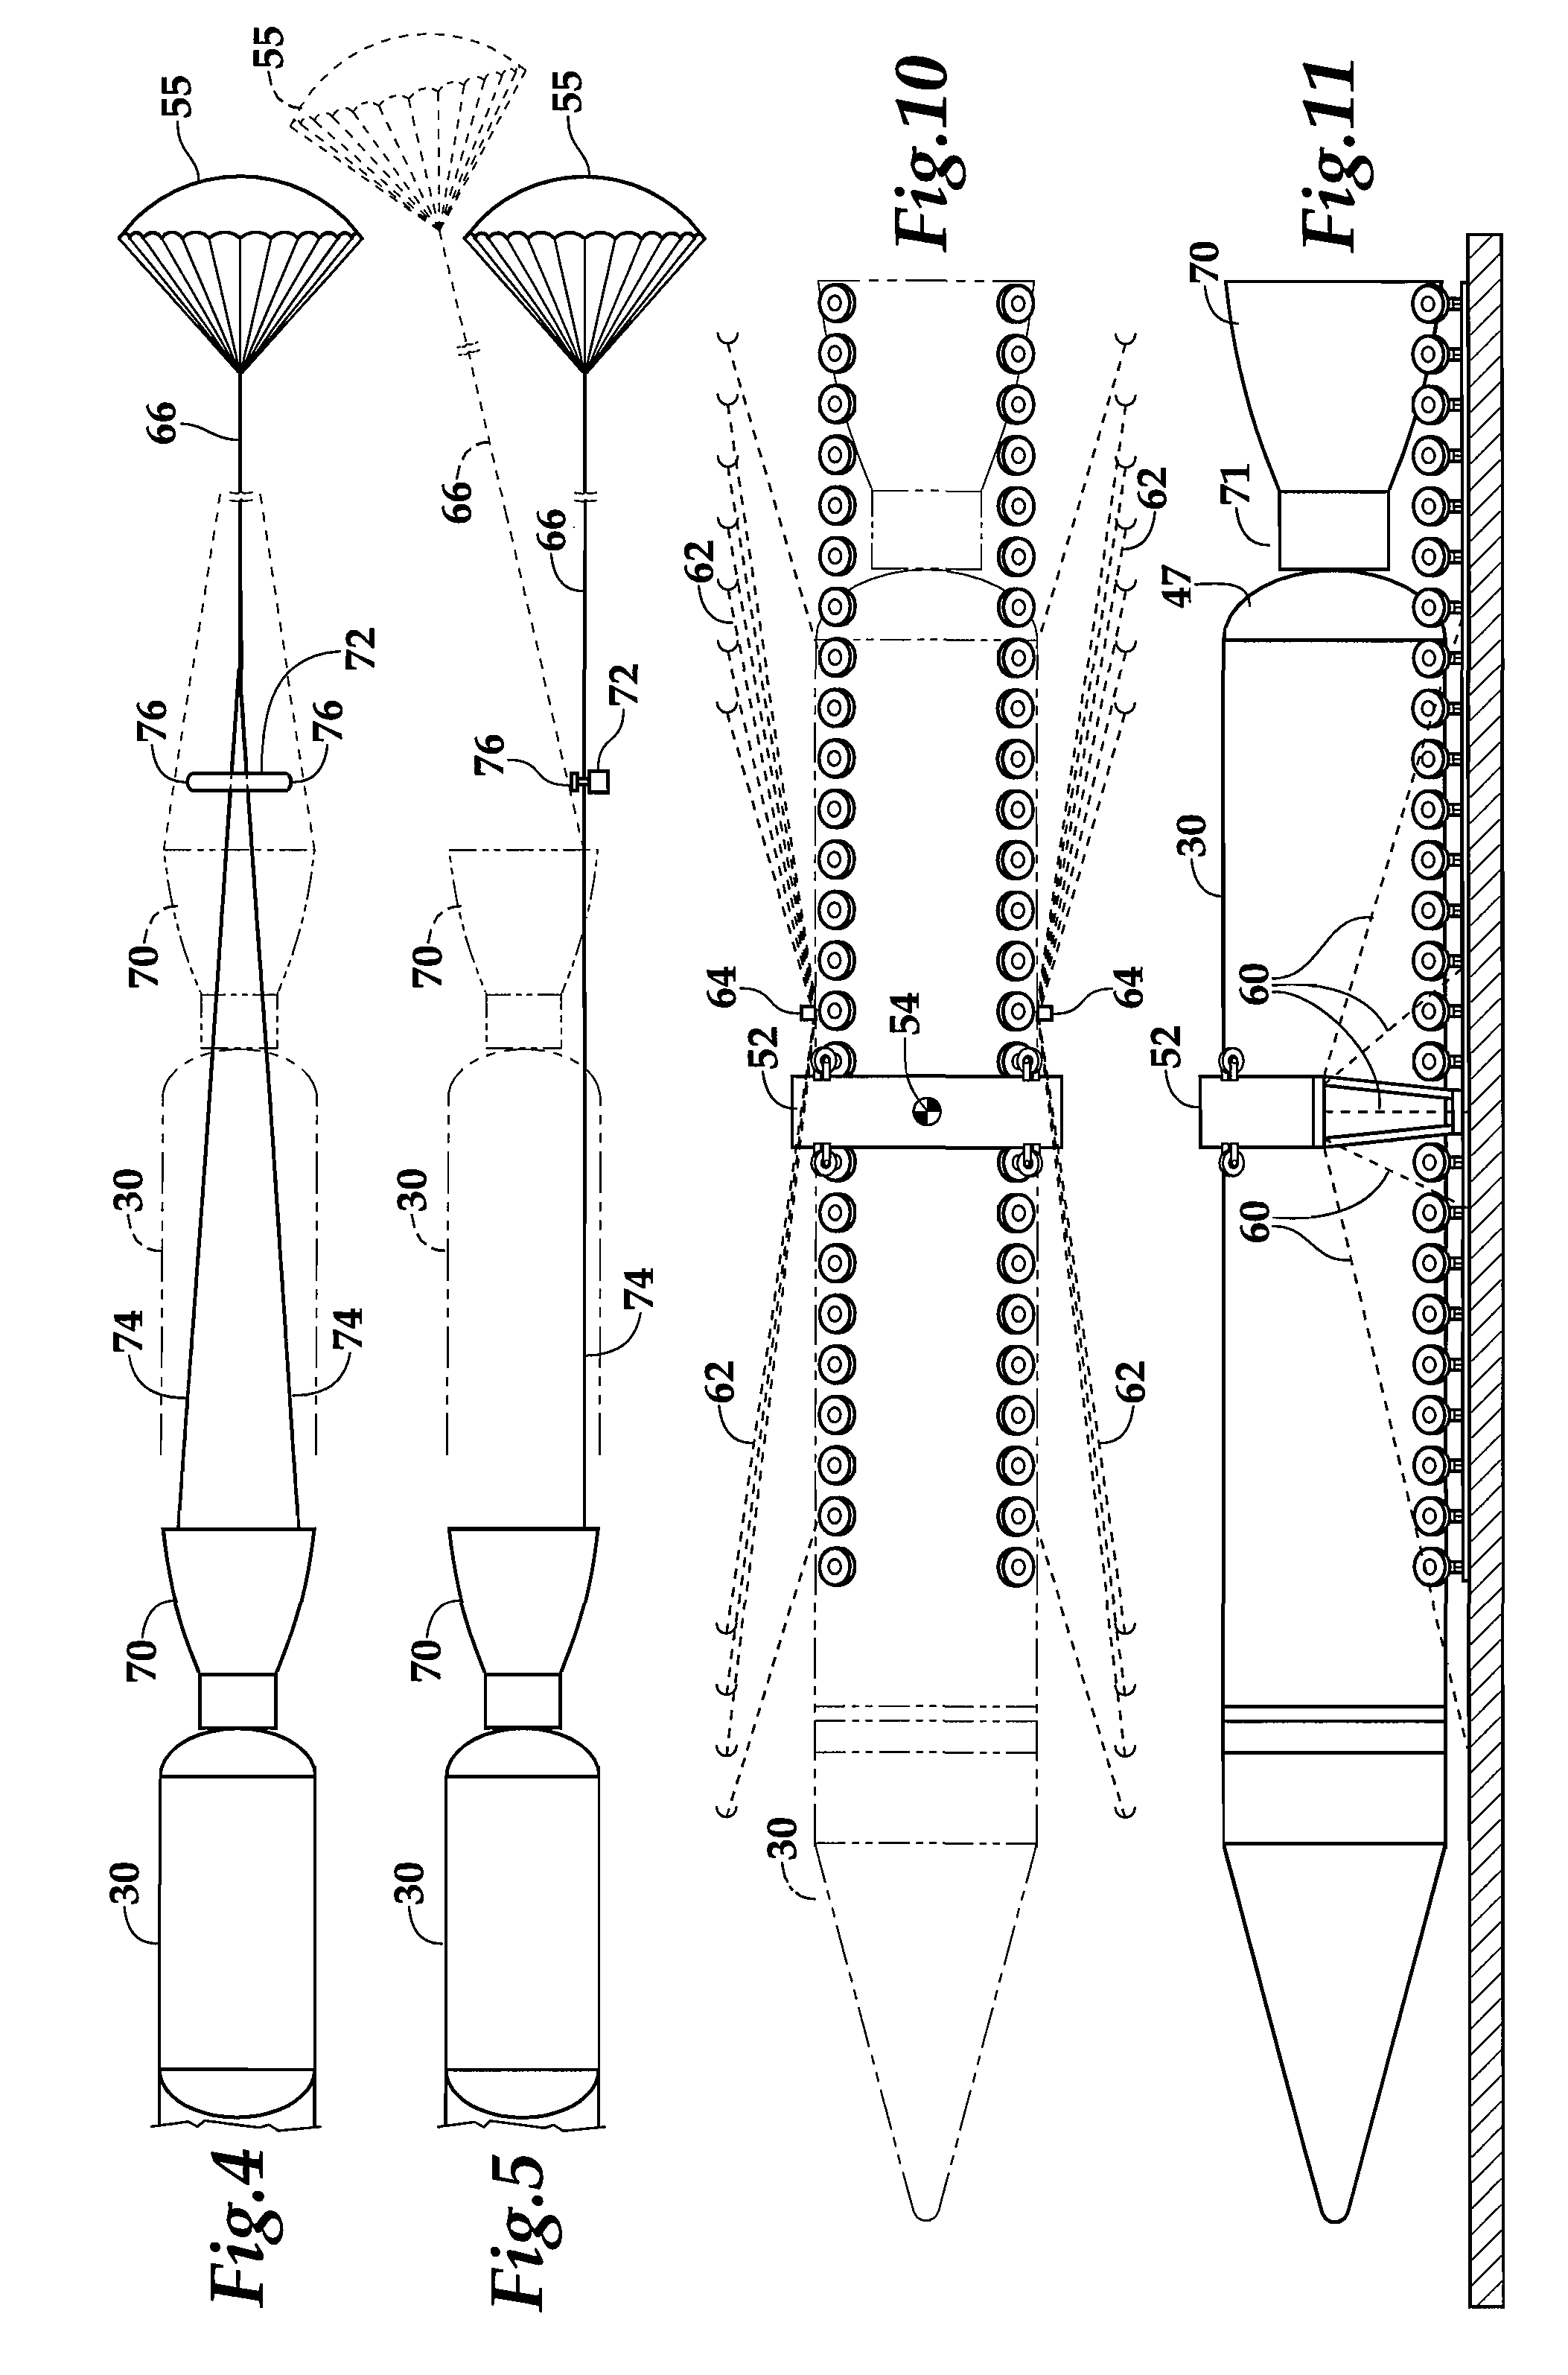 Release mechanism for a forward and aft restrained load in an aircraft